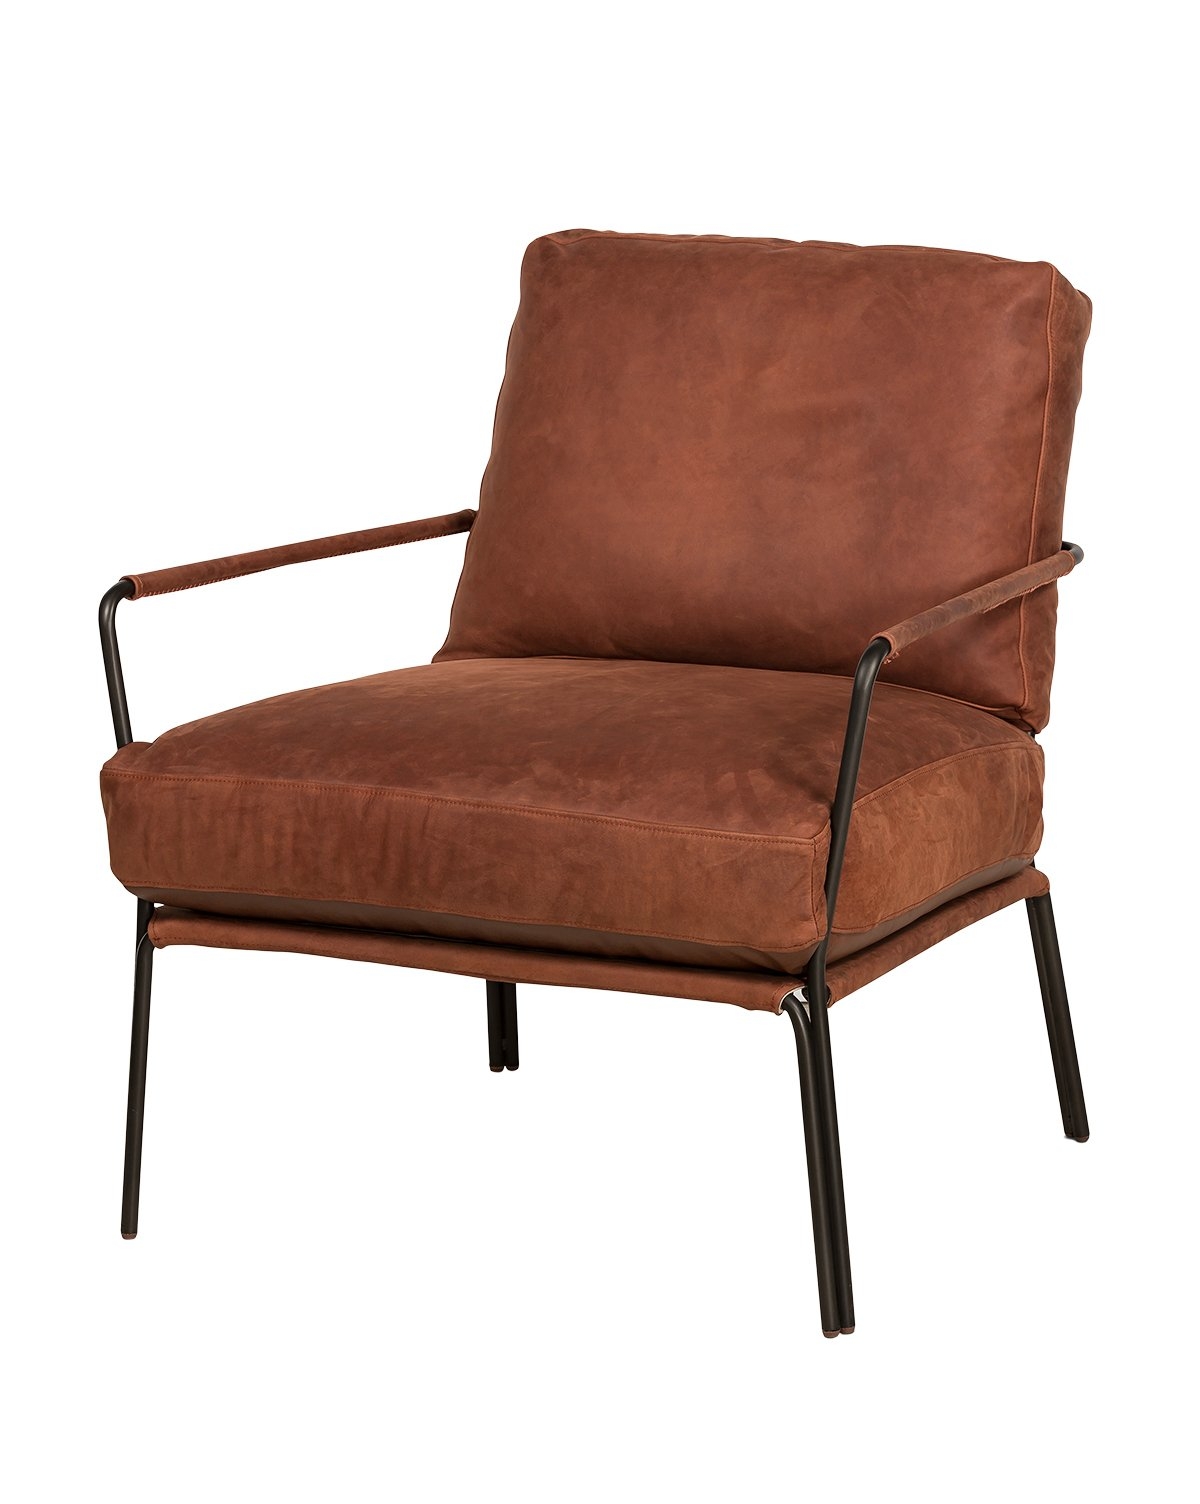 CAMILE CHAIR - BROWN - Image 1